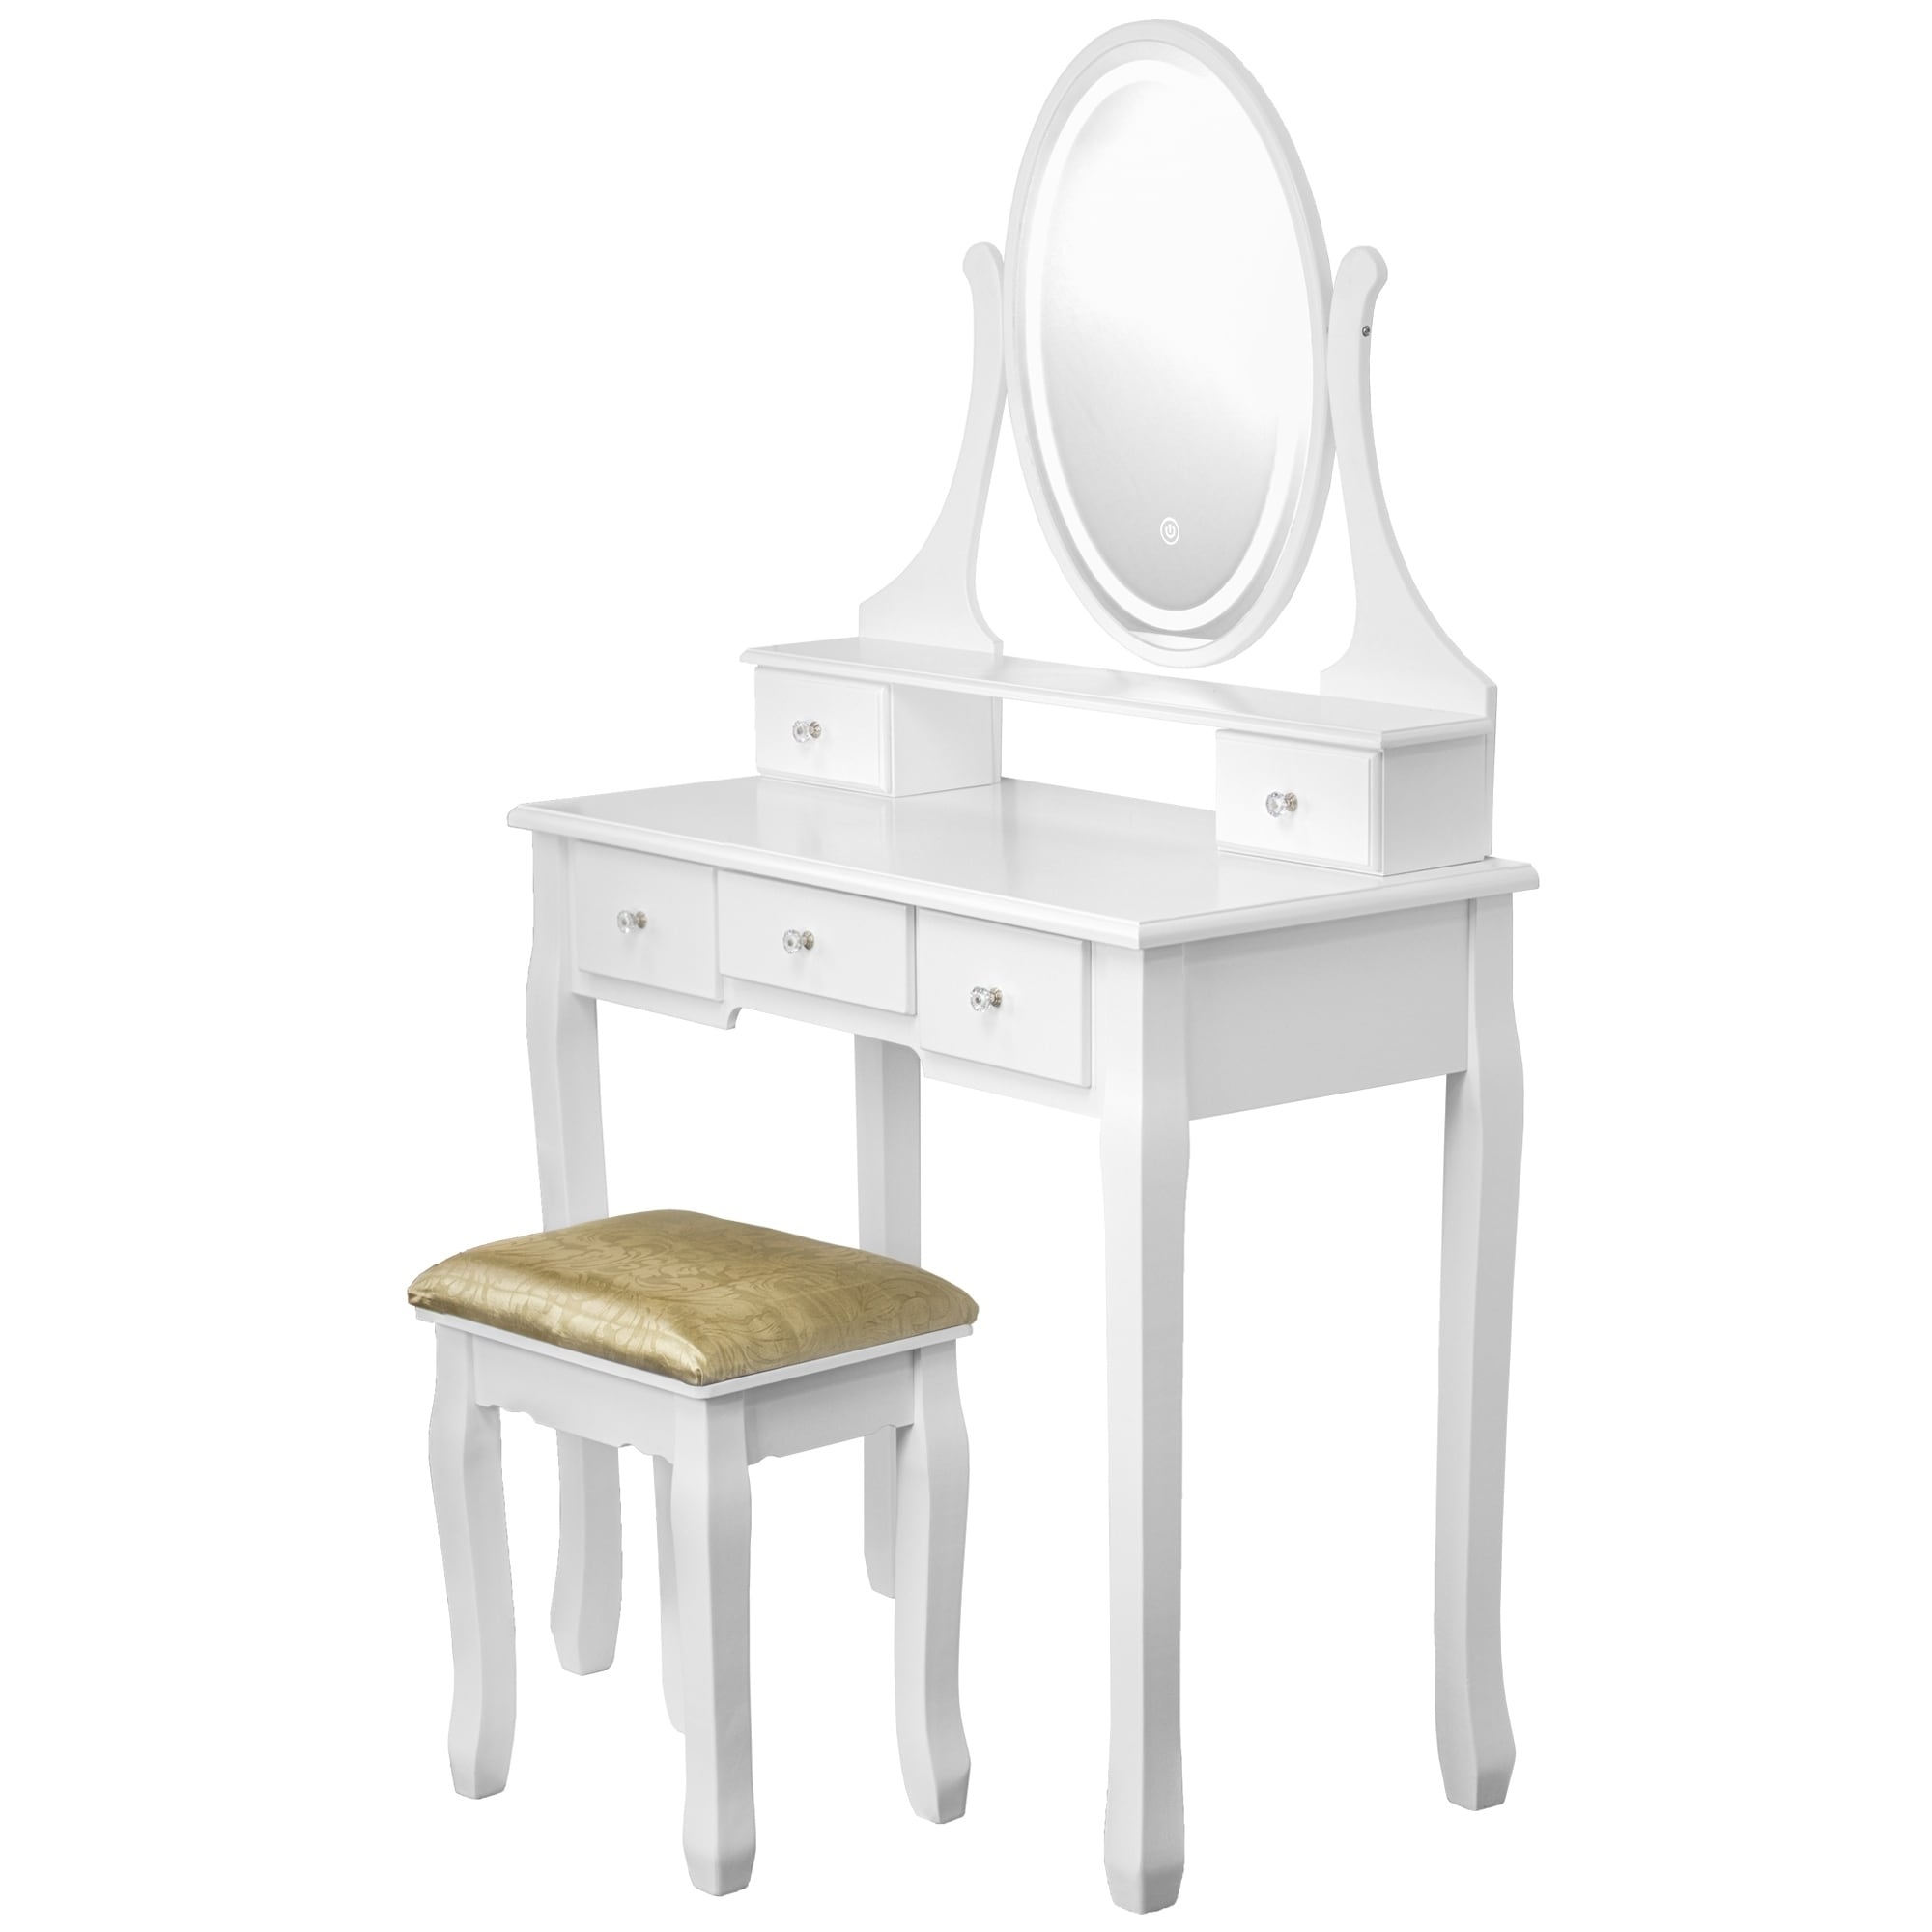 Shop American Art Decor Makeup Vanity Table Set With Light Up